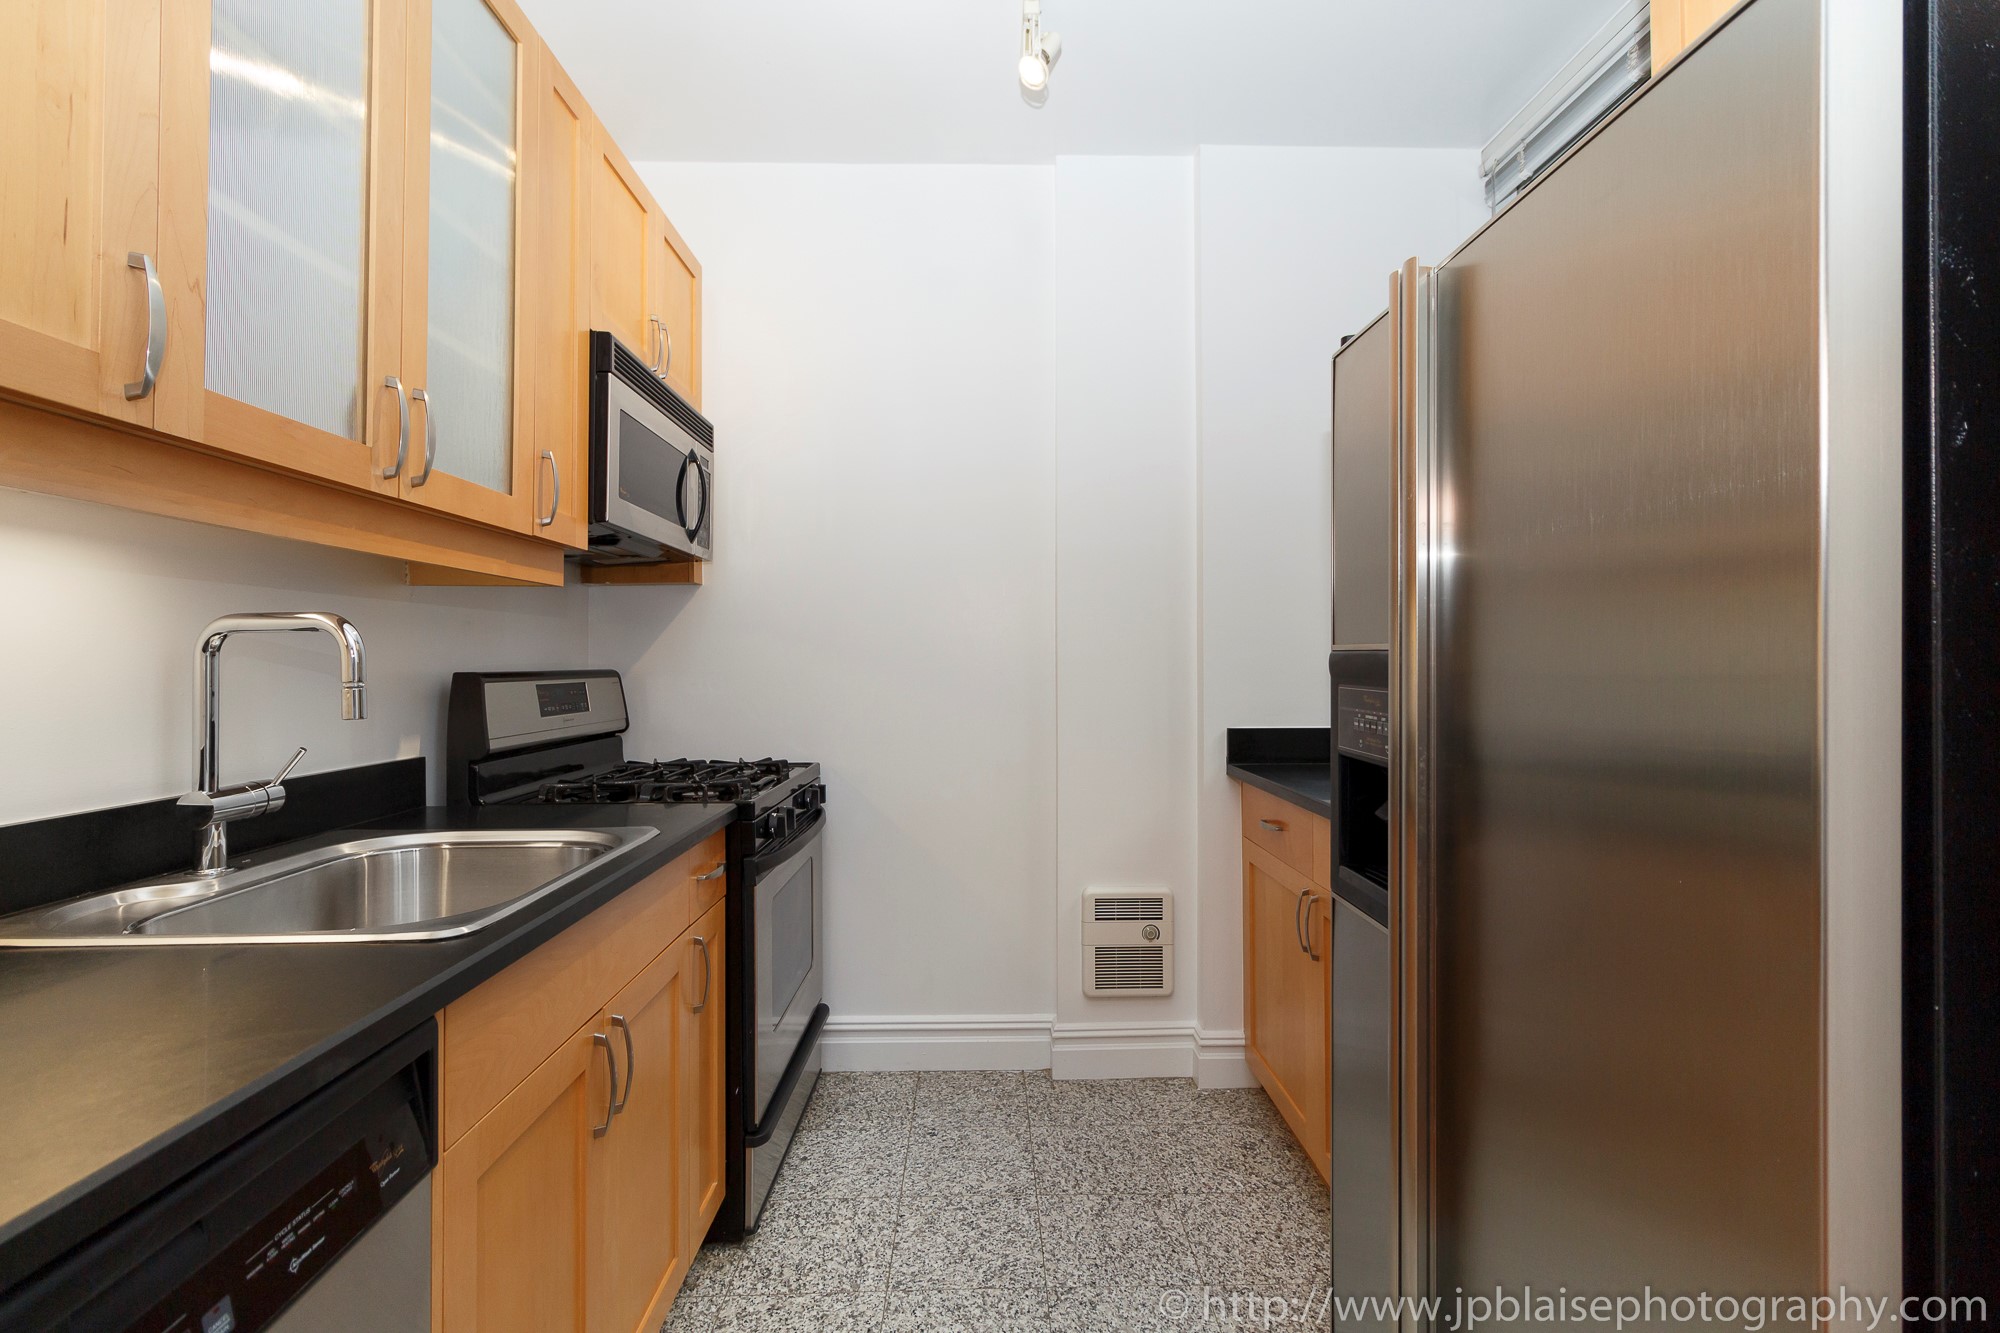 NY airbnb real estate interior apartment photographer upper east side manhattan ny new york kitchen